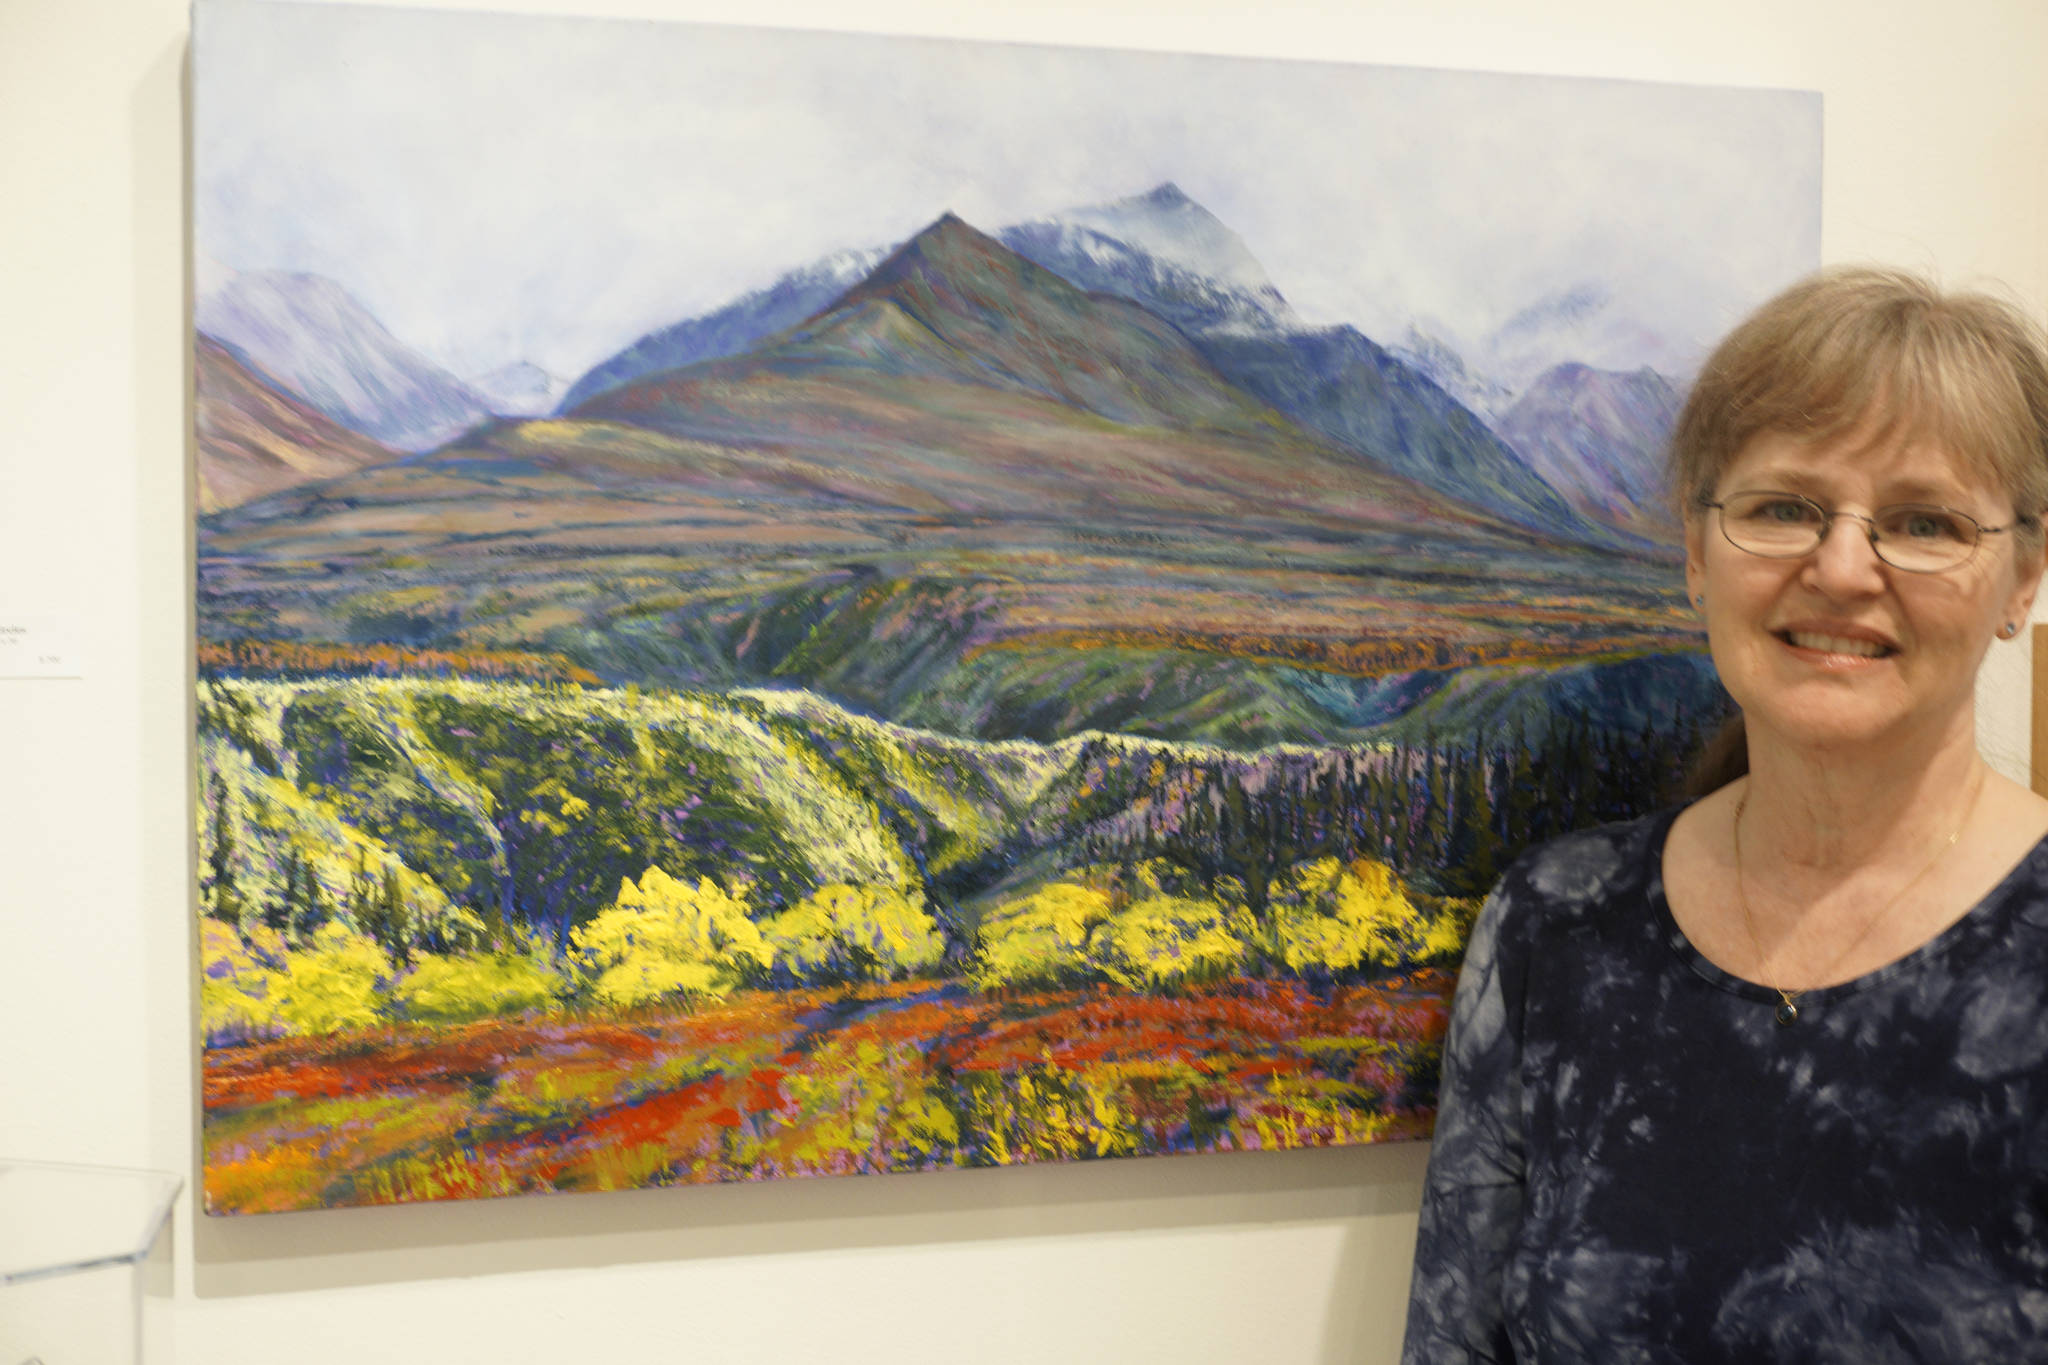 The long view Homer artist Rita Pfenninger poses last Friday for the opening of her show, Mountain, Foliage, Ocean, Sky at Fireweed Gallery. The painting shows the Chugach Mountains as seen from Sheep Mountain Lodge, Glenn Highway. Also in the show is jewelry by her husband, Larry Hoare.